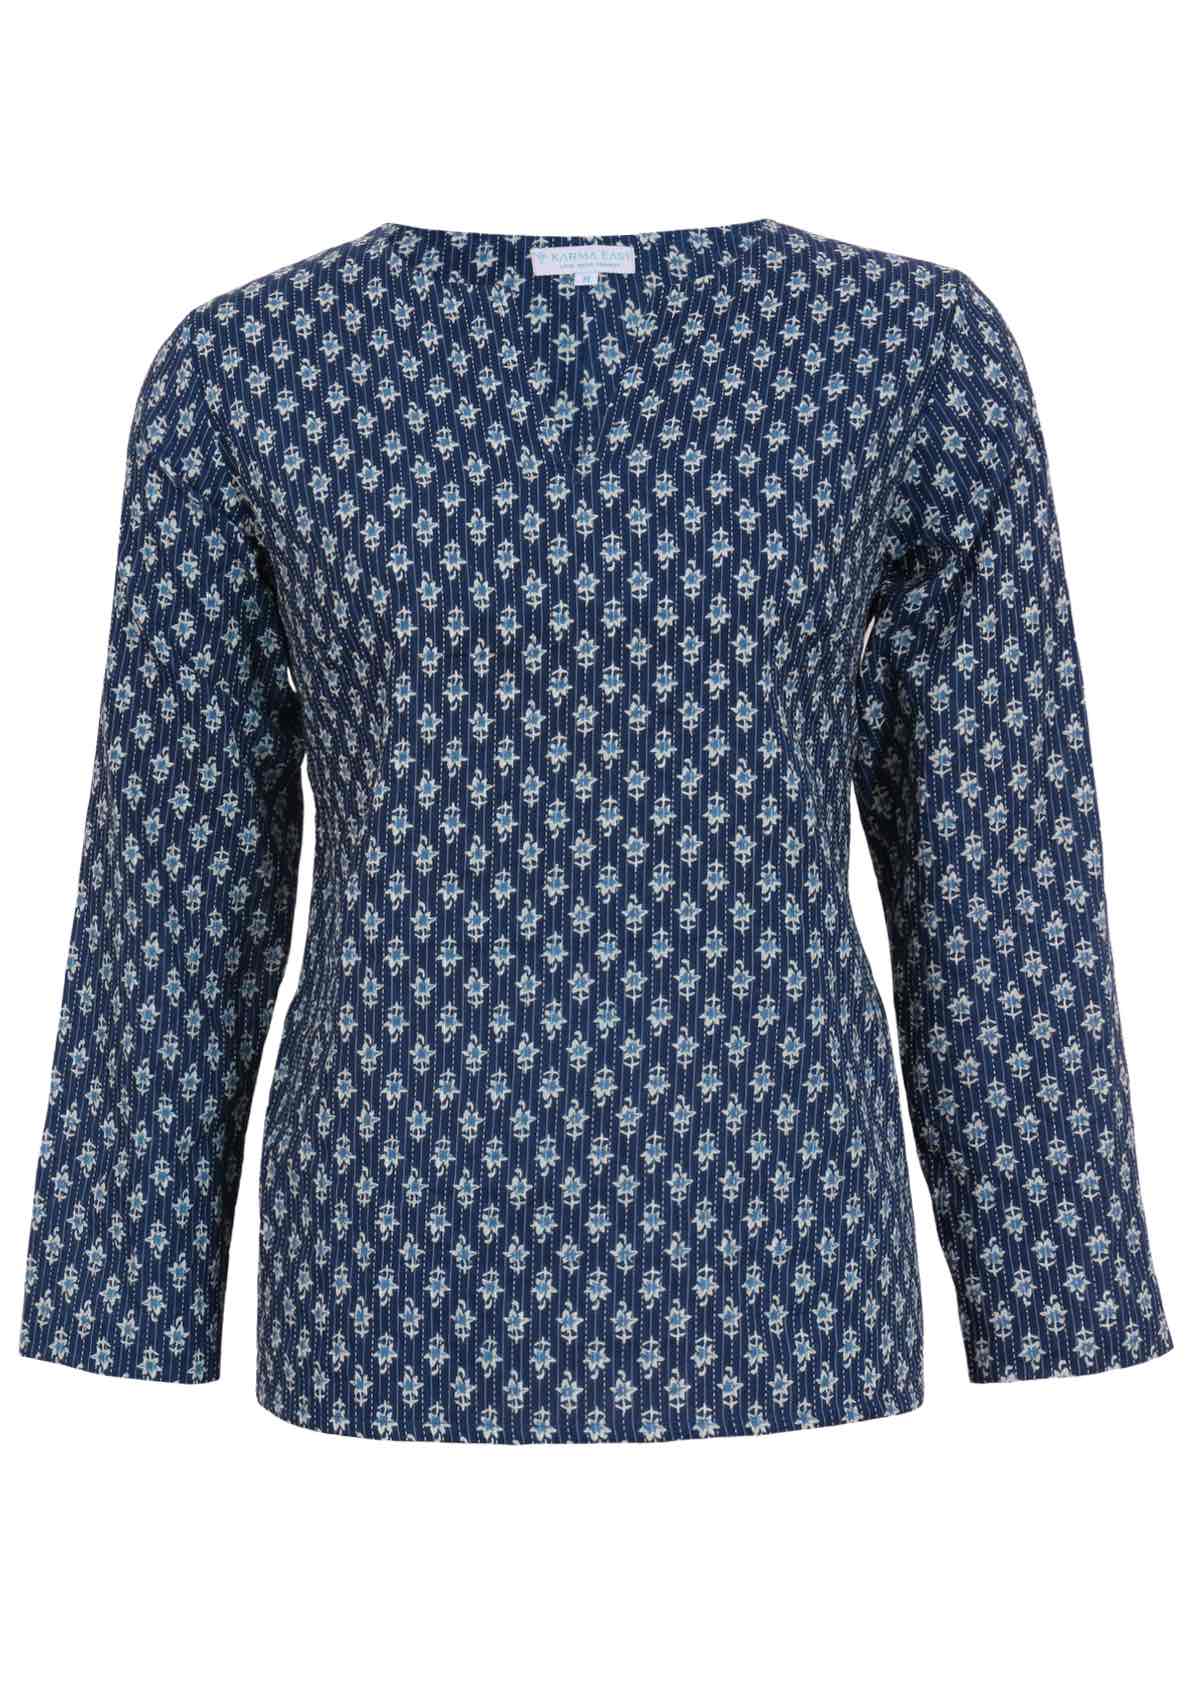 100% cotton blue blouse with a round neckline featuring a keyhole cutout. 